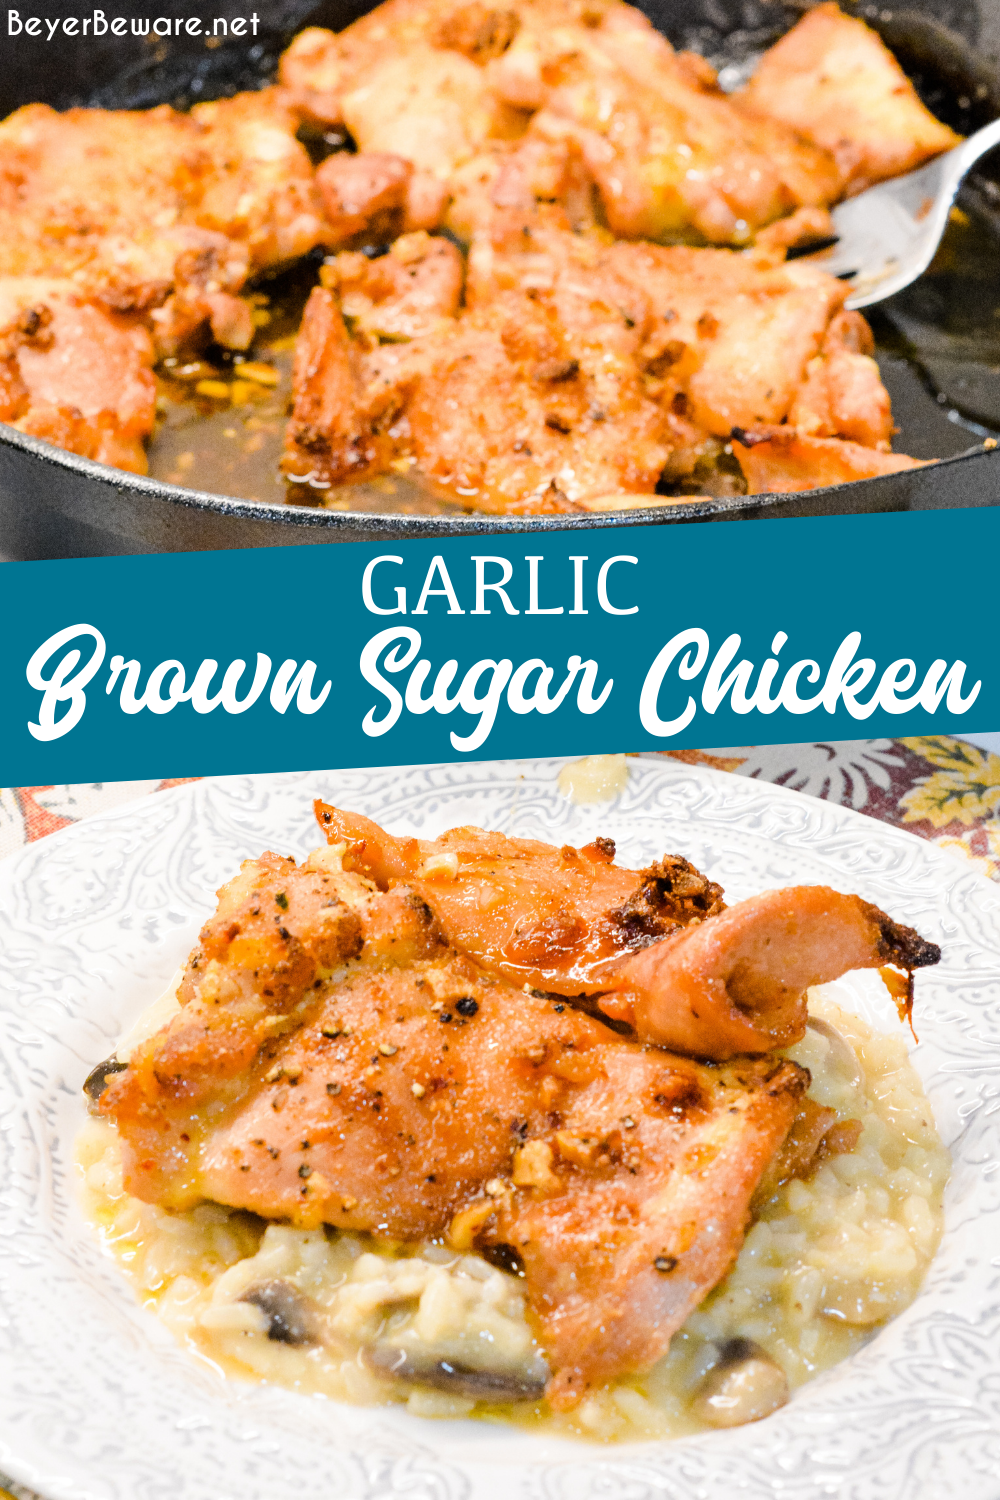 Garlic brown sugar chicken is a simple oven-baked chicken recipe, full of flavor with less than 5 ingredients and can be on the table in 30 minutes.